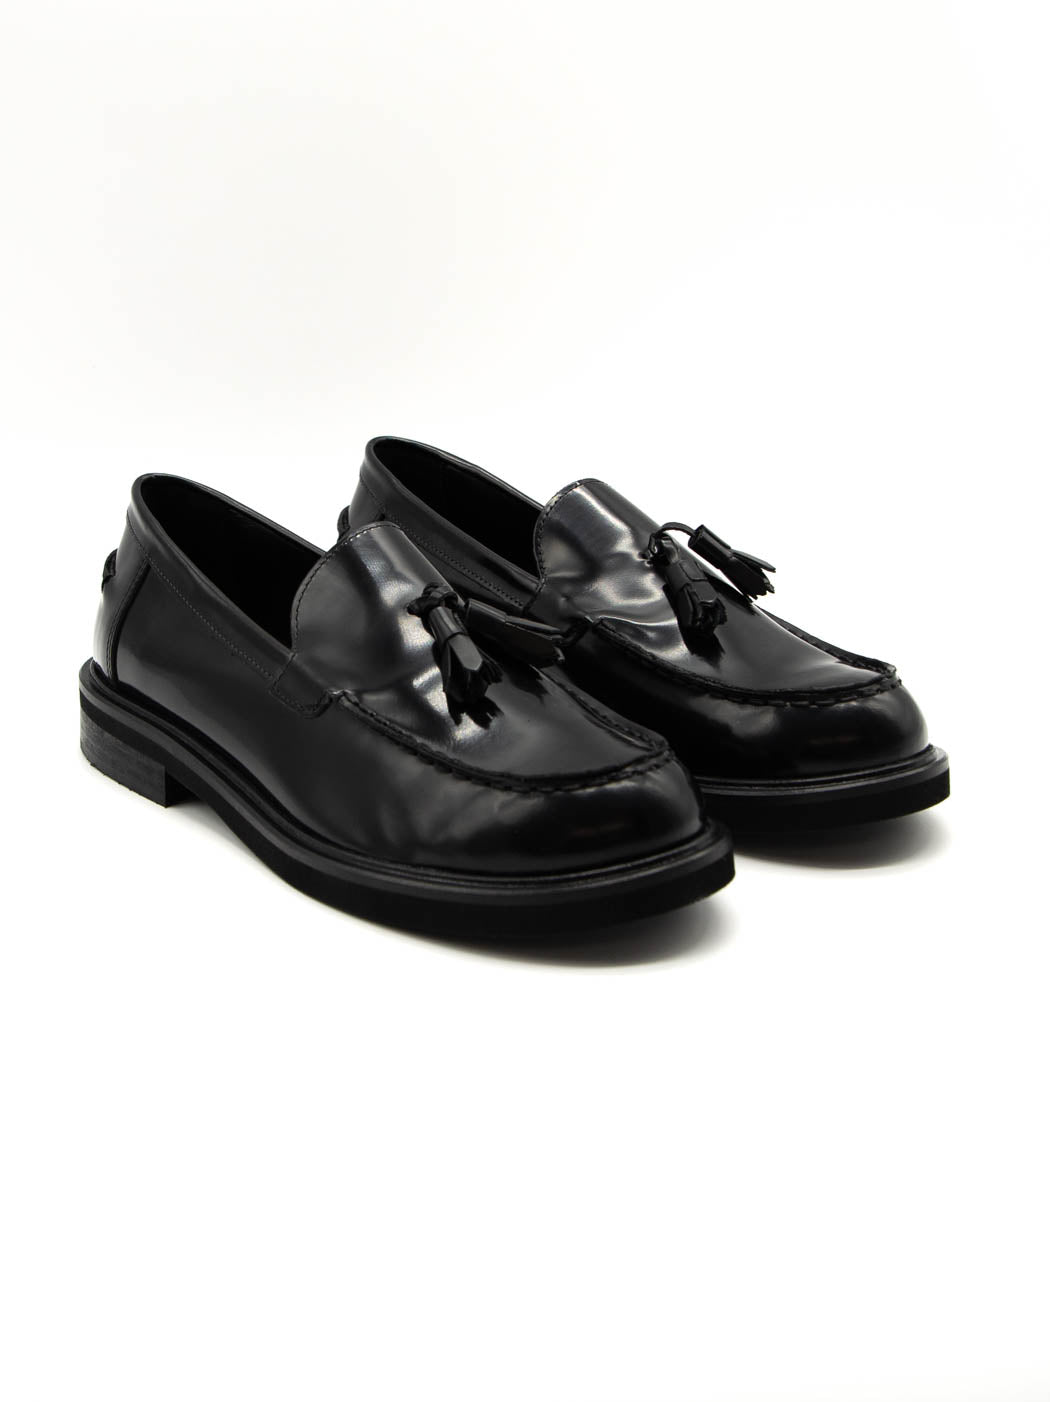 JPG32Q BRUSHED LEATHER LOAFERS